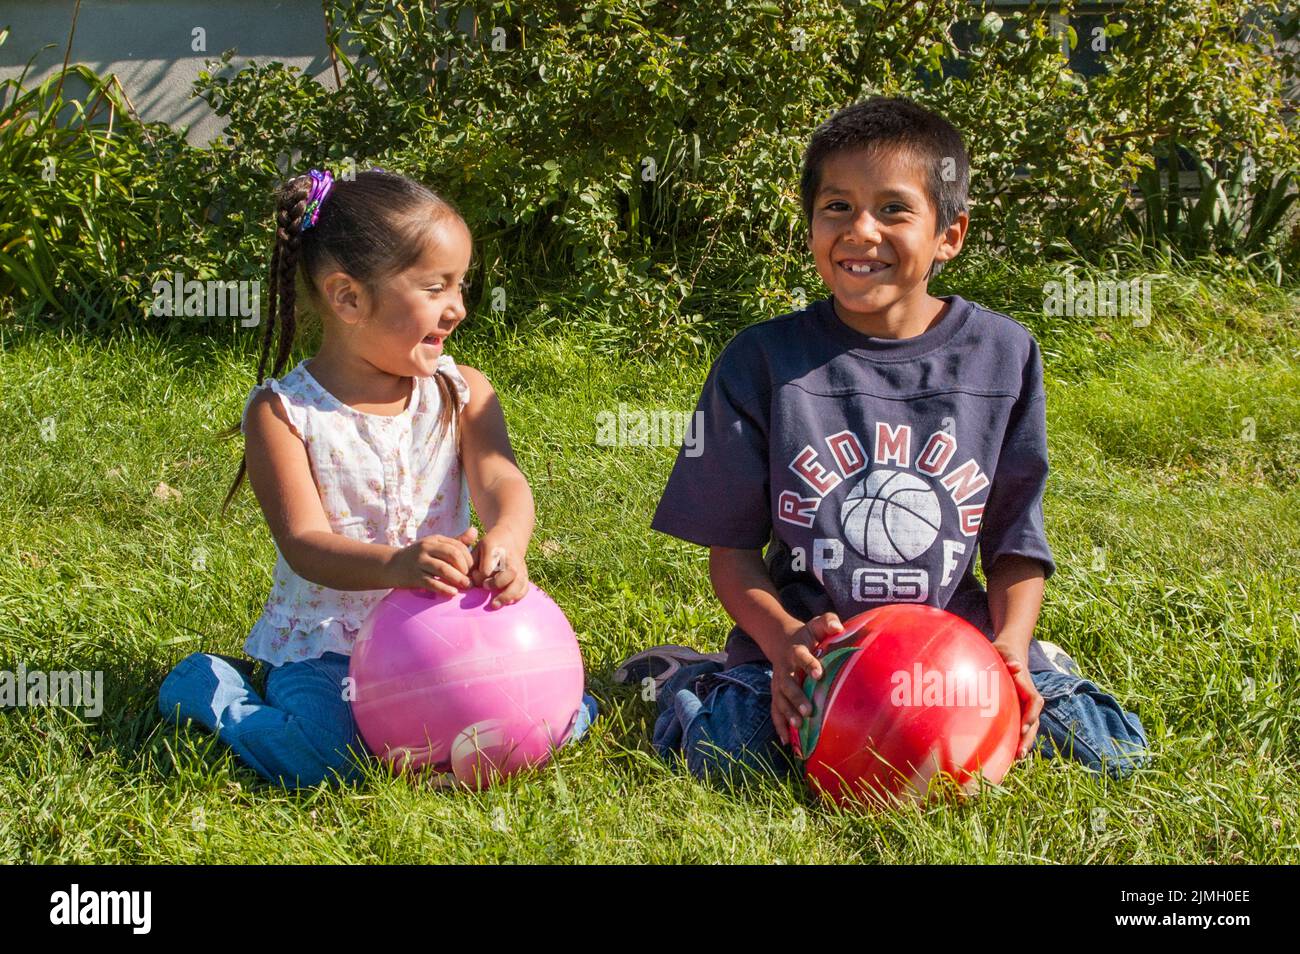 Two Native American children, sister and brother, play with large balls together outside. Stock Photo